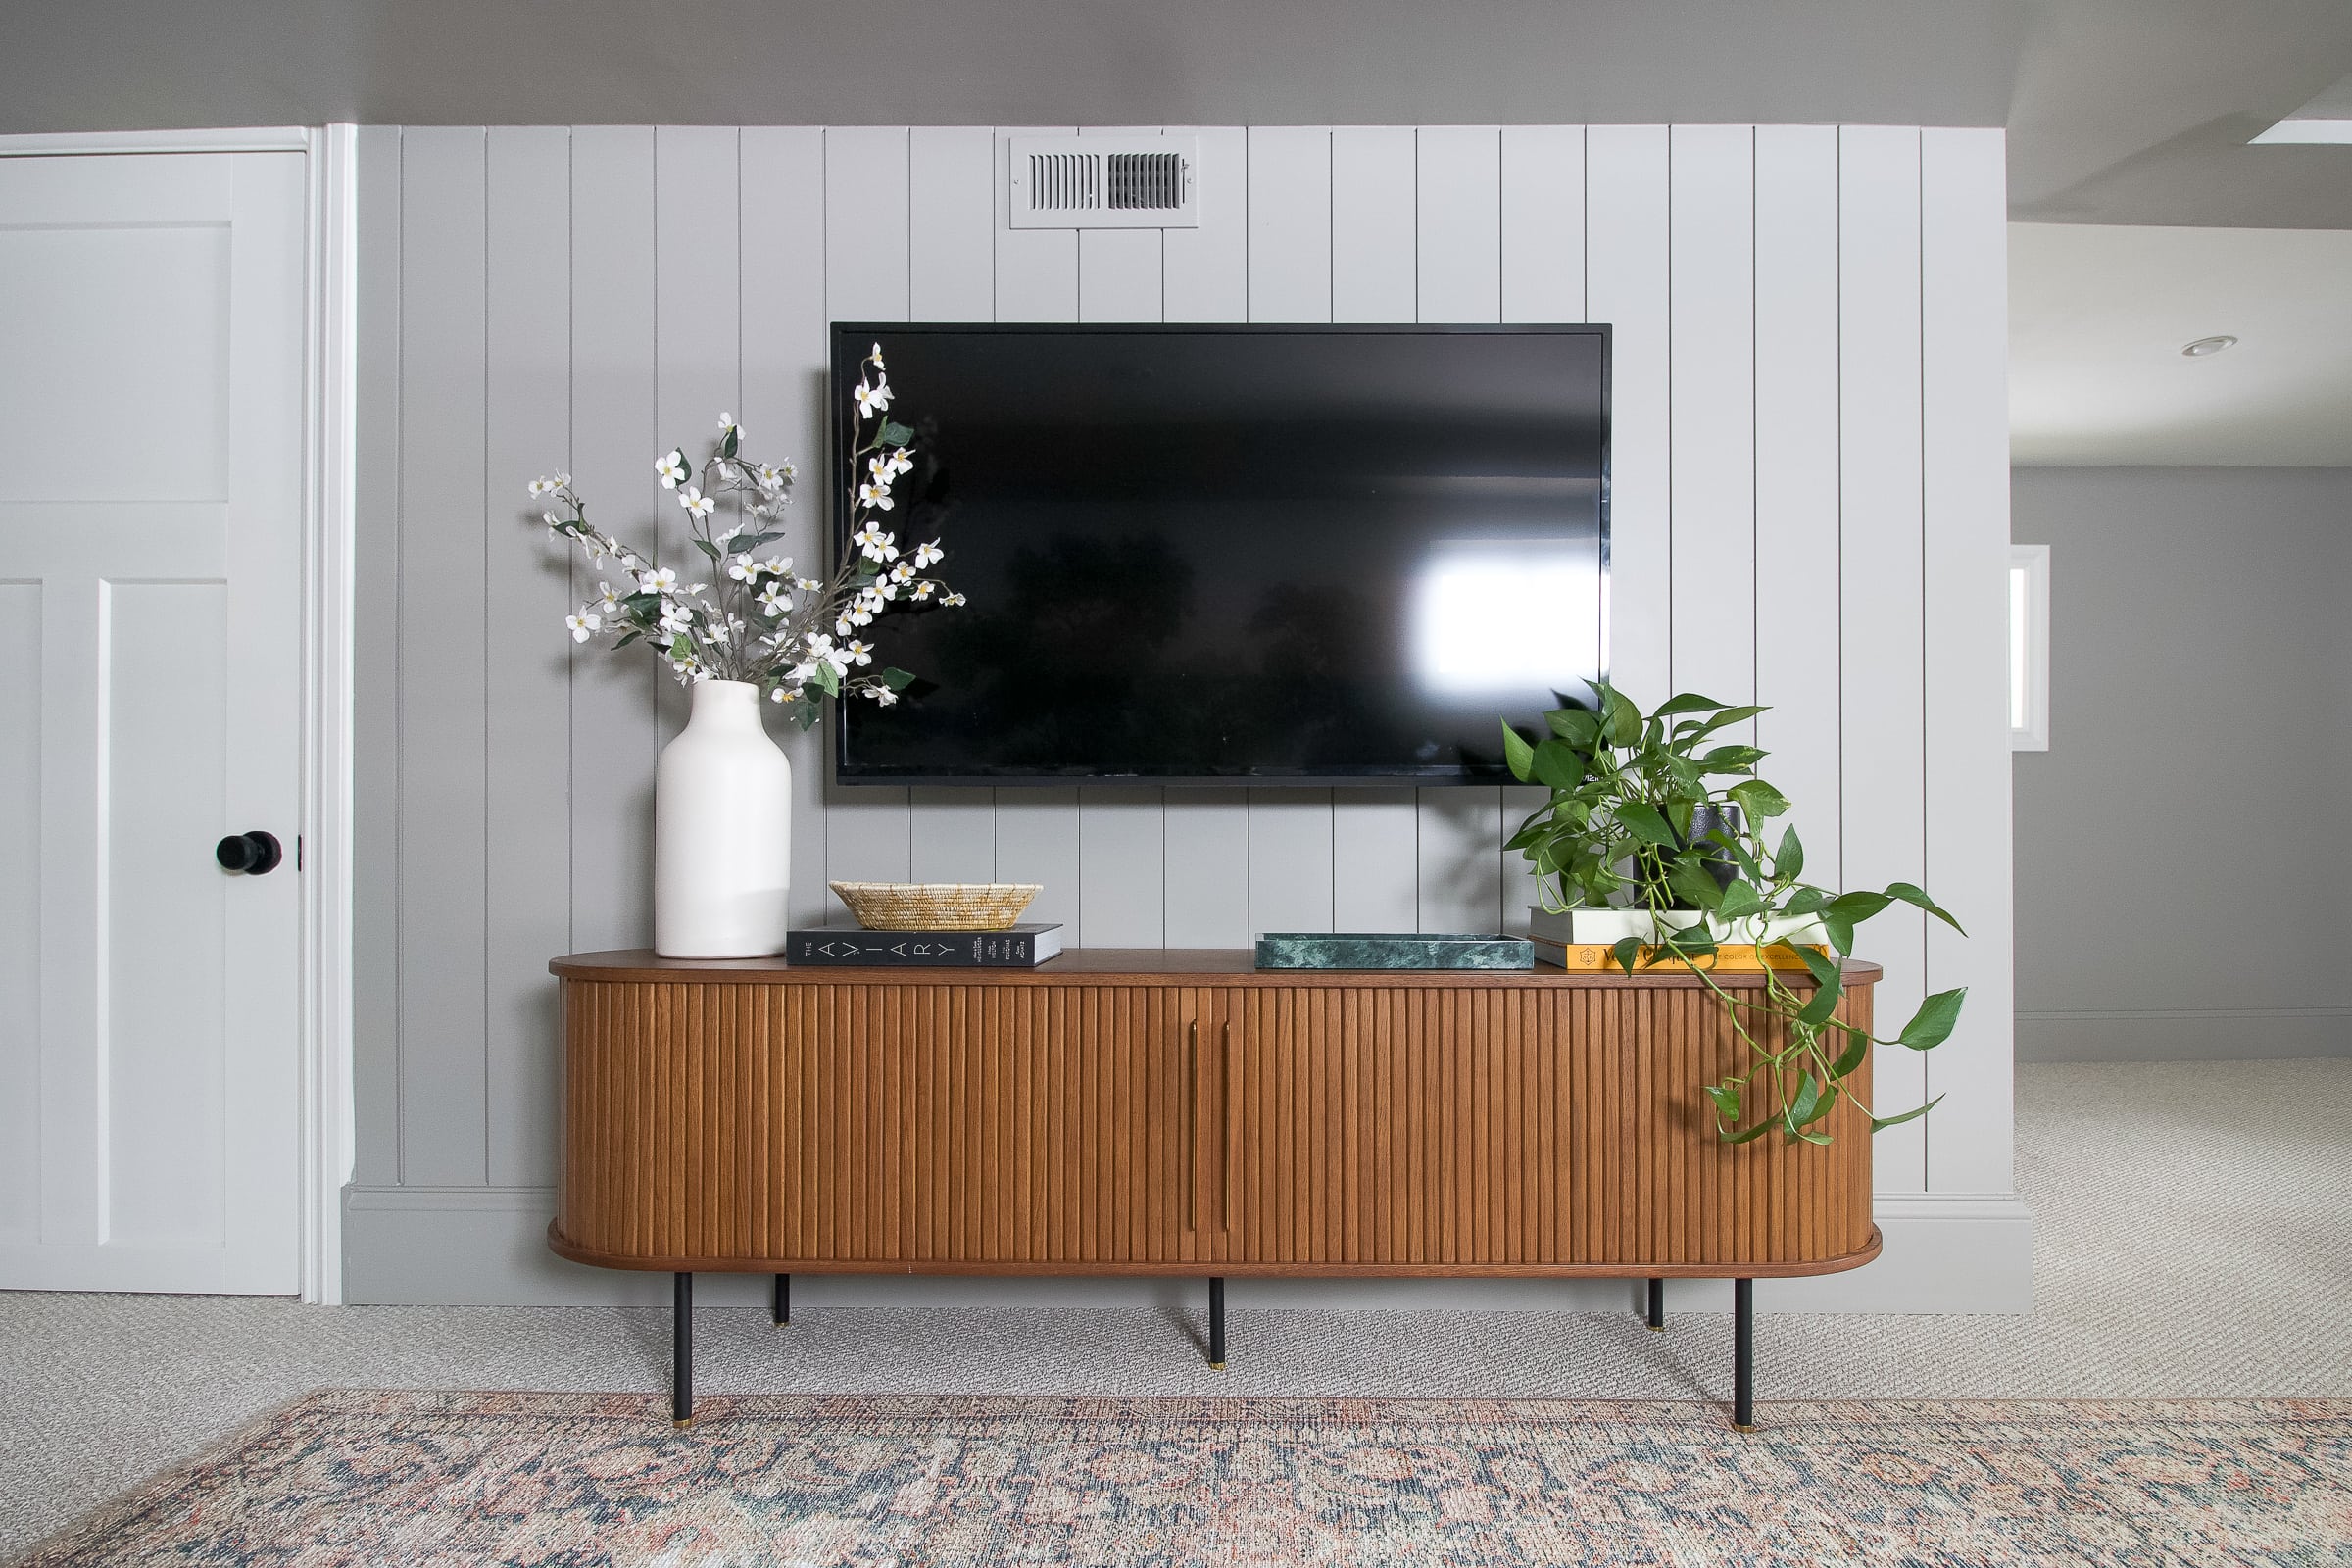 The Harper TV stand from Castlery